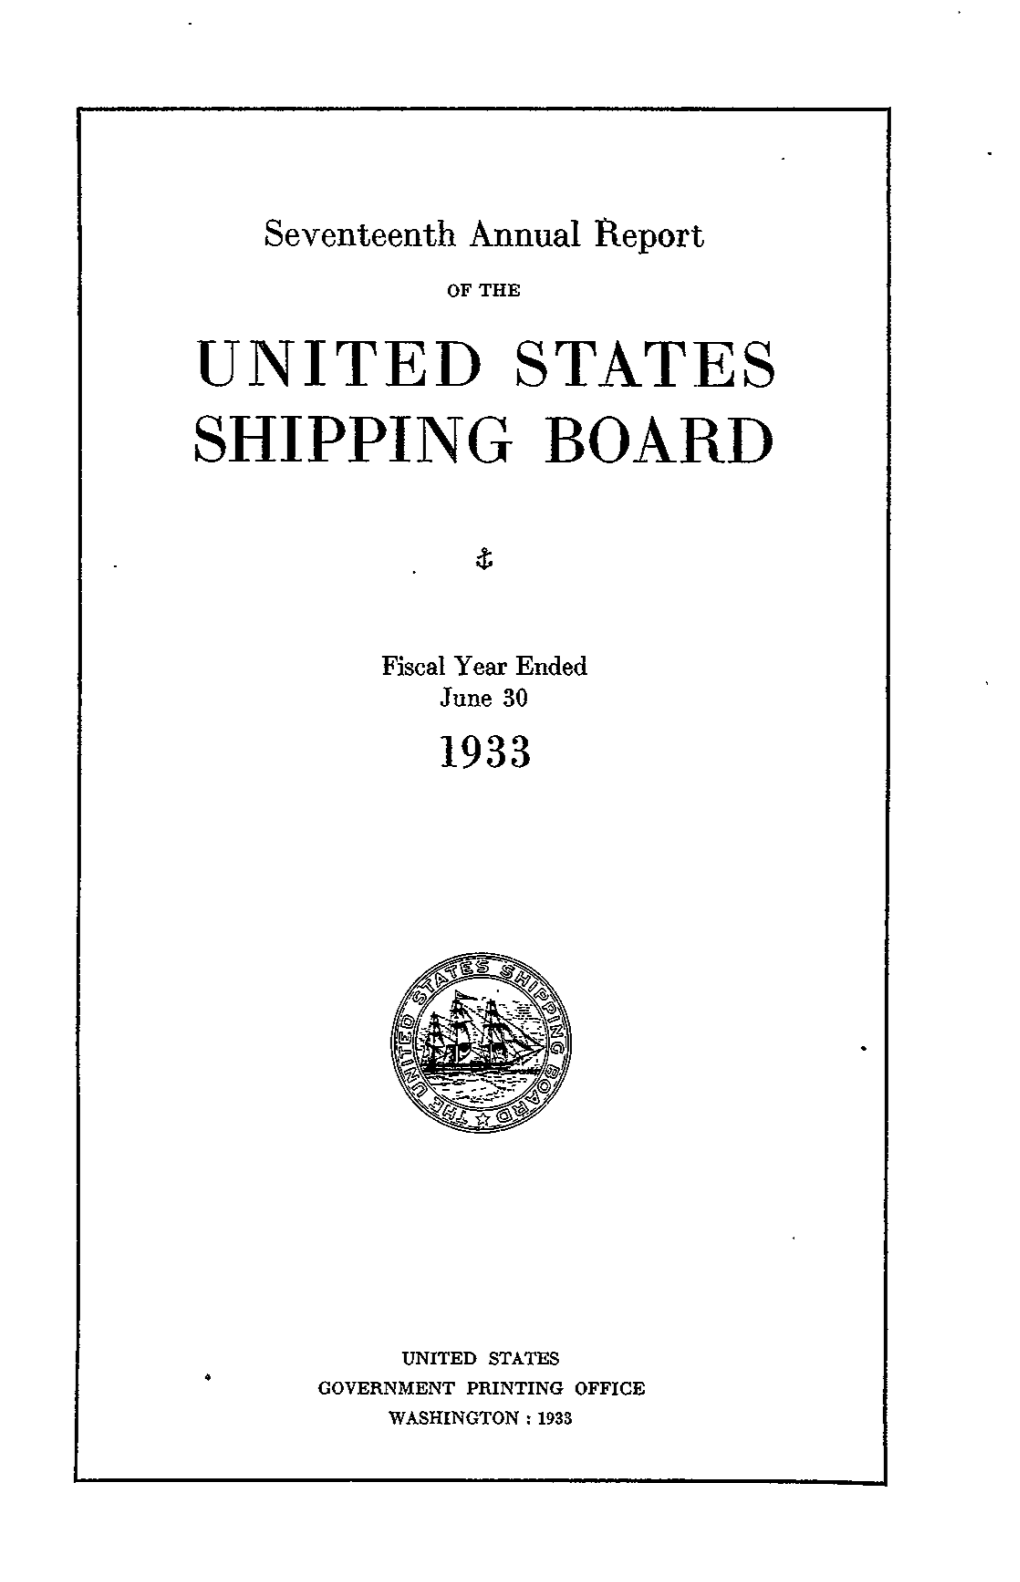 Annual Report for Fiscal Year 1933